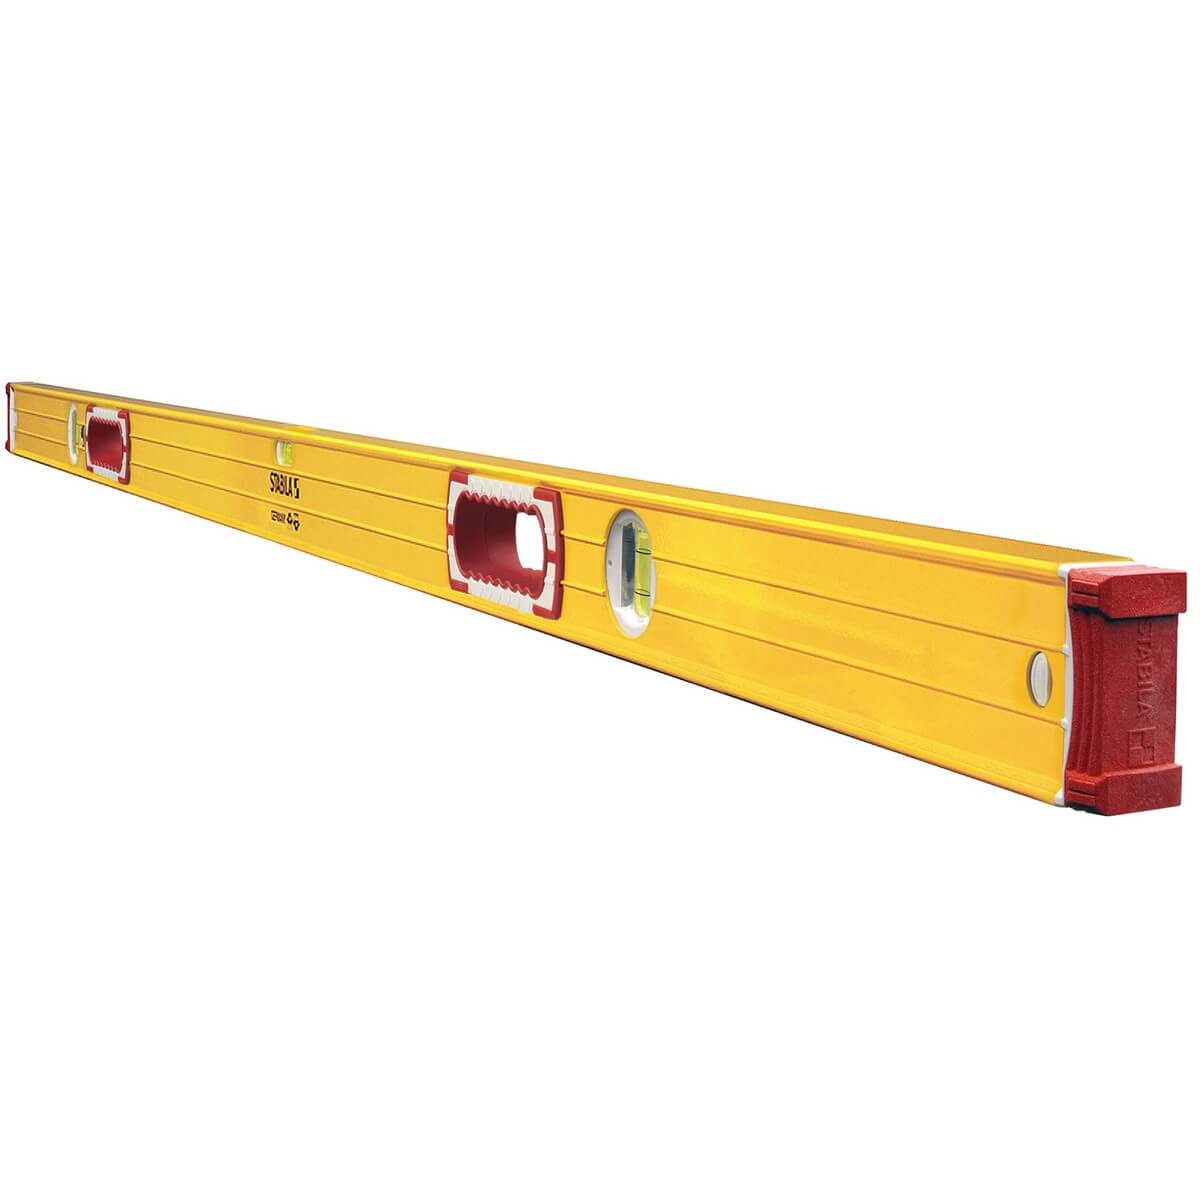 Stabila 37472 - 72-Inch builders level, High Strength Frame, Accuracy Certified - wise-line-tools